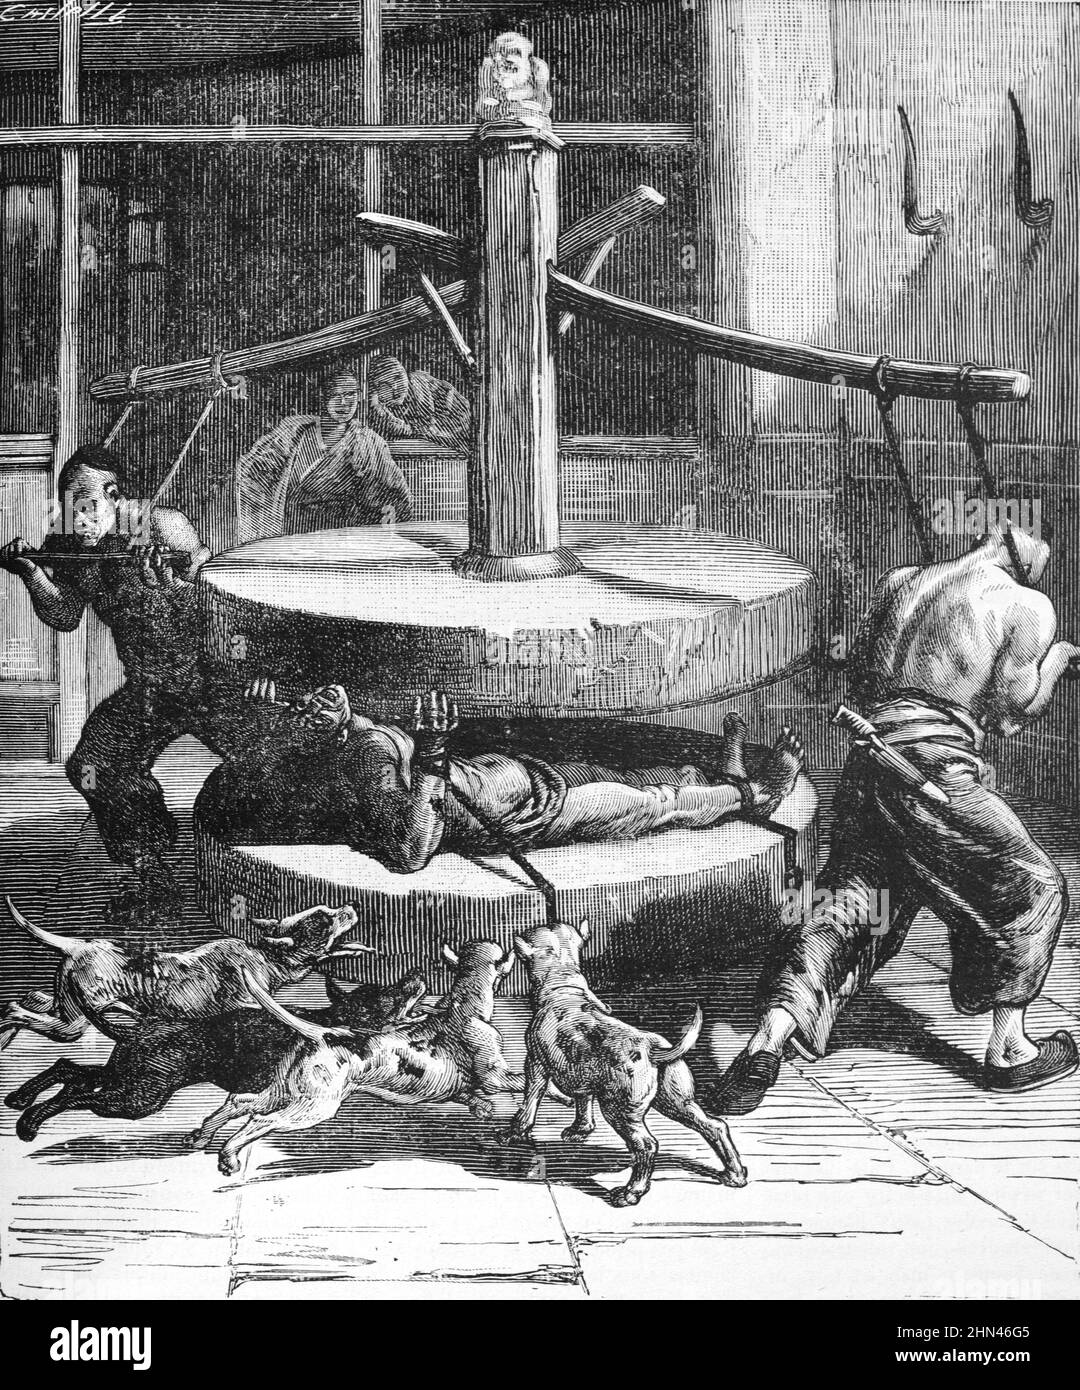 Capital Punishment, Killing or Torture Using Stone Press in China. Vintage Illustration or Engraving 1881 (Castelli) Stock Photo